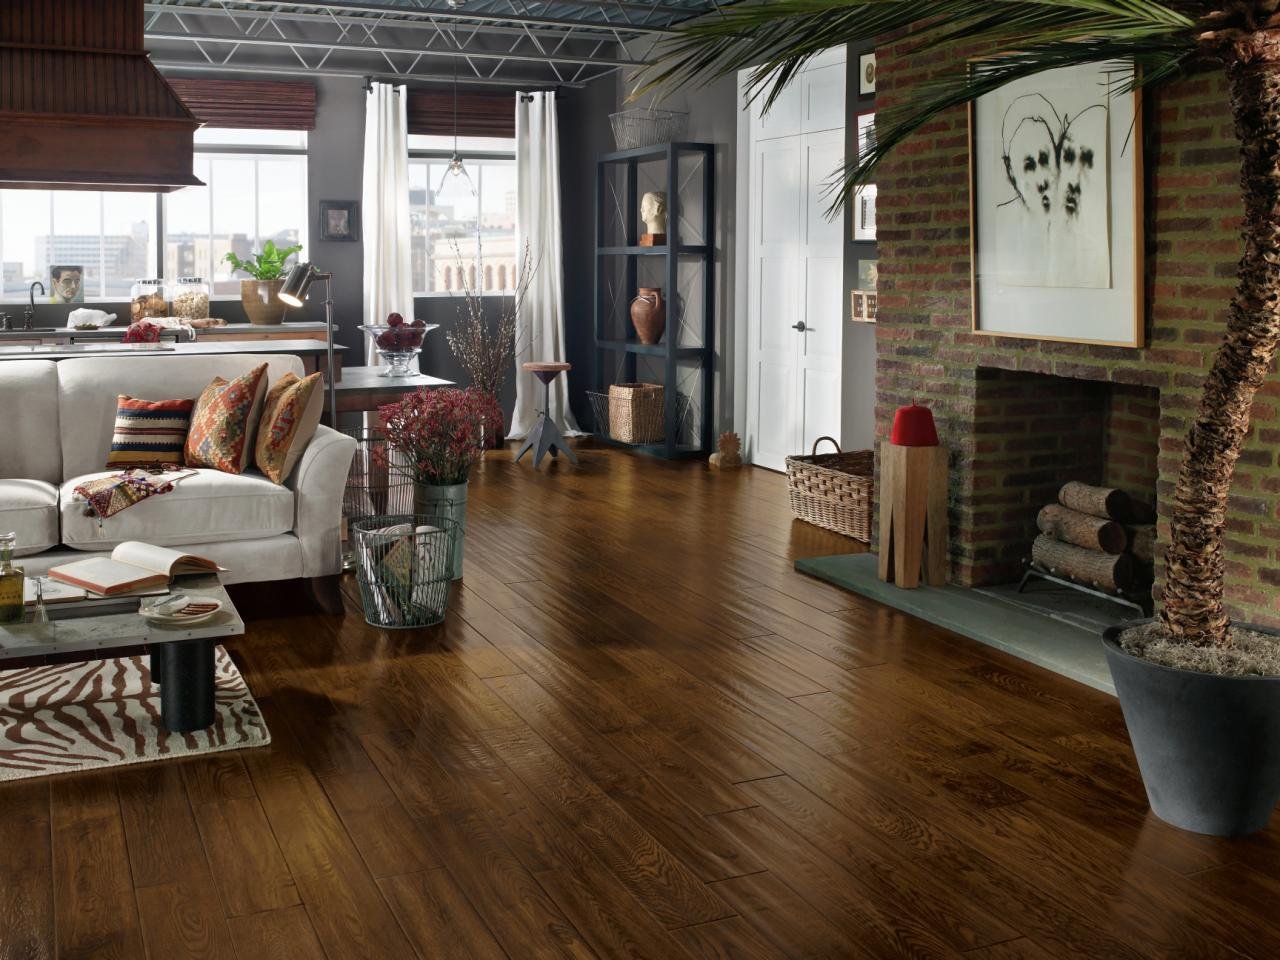 Decorating Ideas For Living Room With Wood Floors